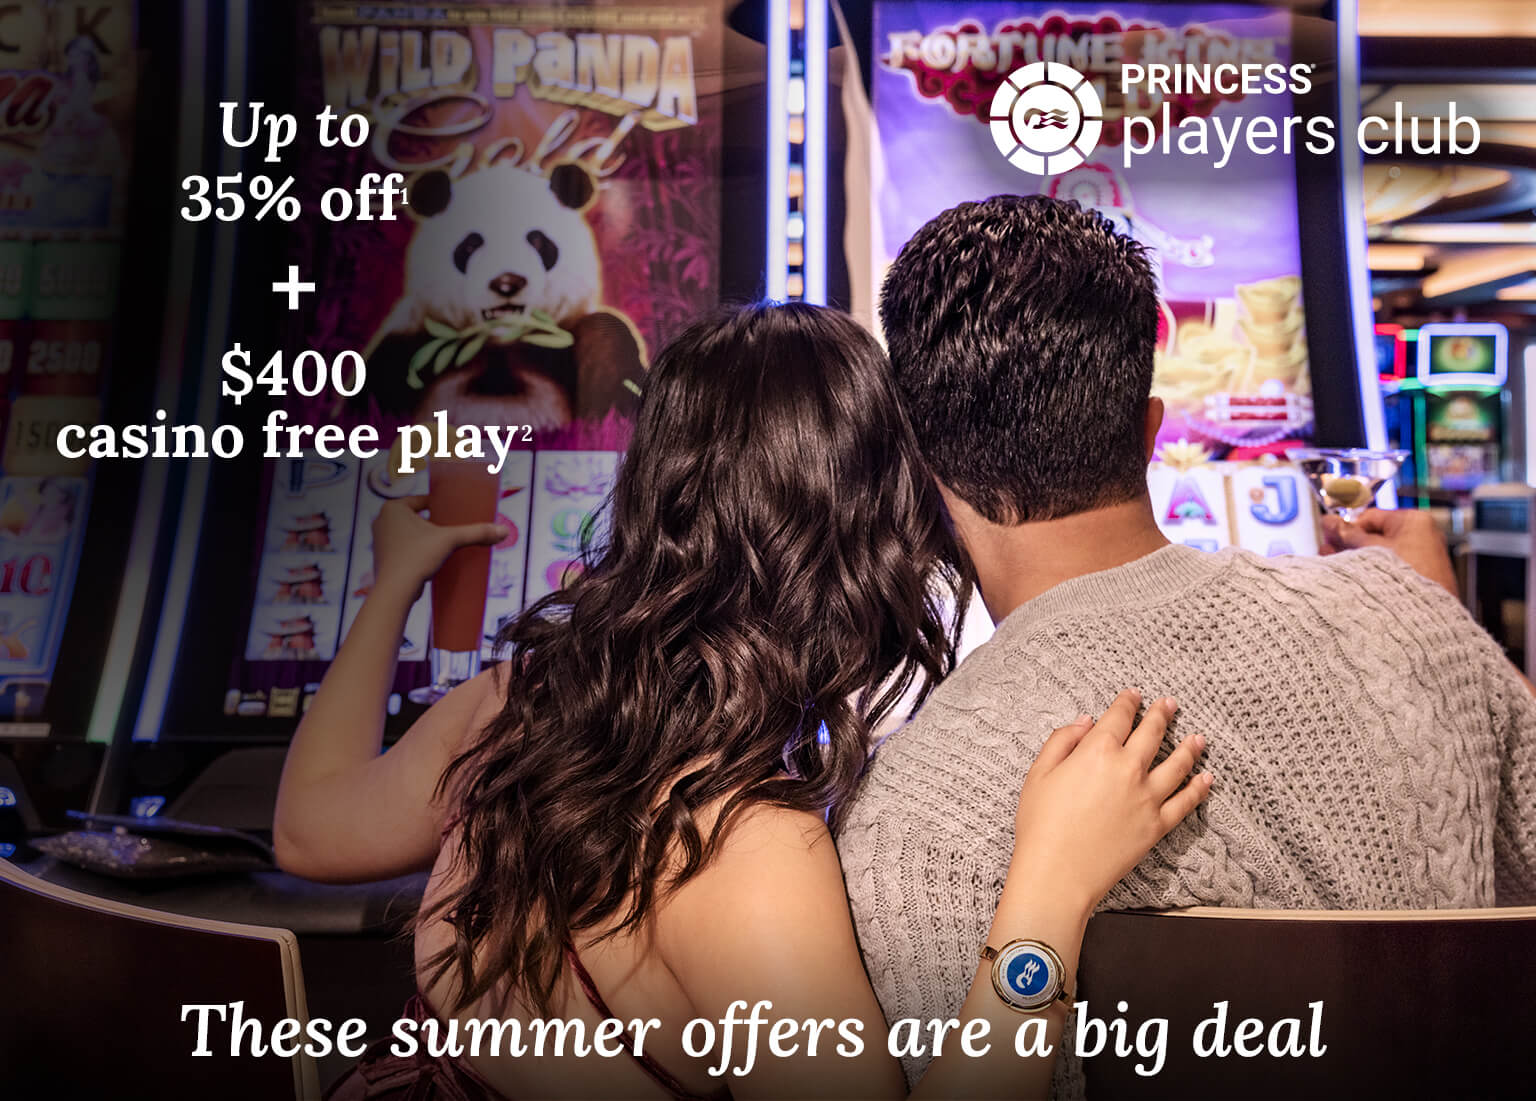 Up to 35% off + $400 casino free play + Princess Plus. Click here to book.